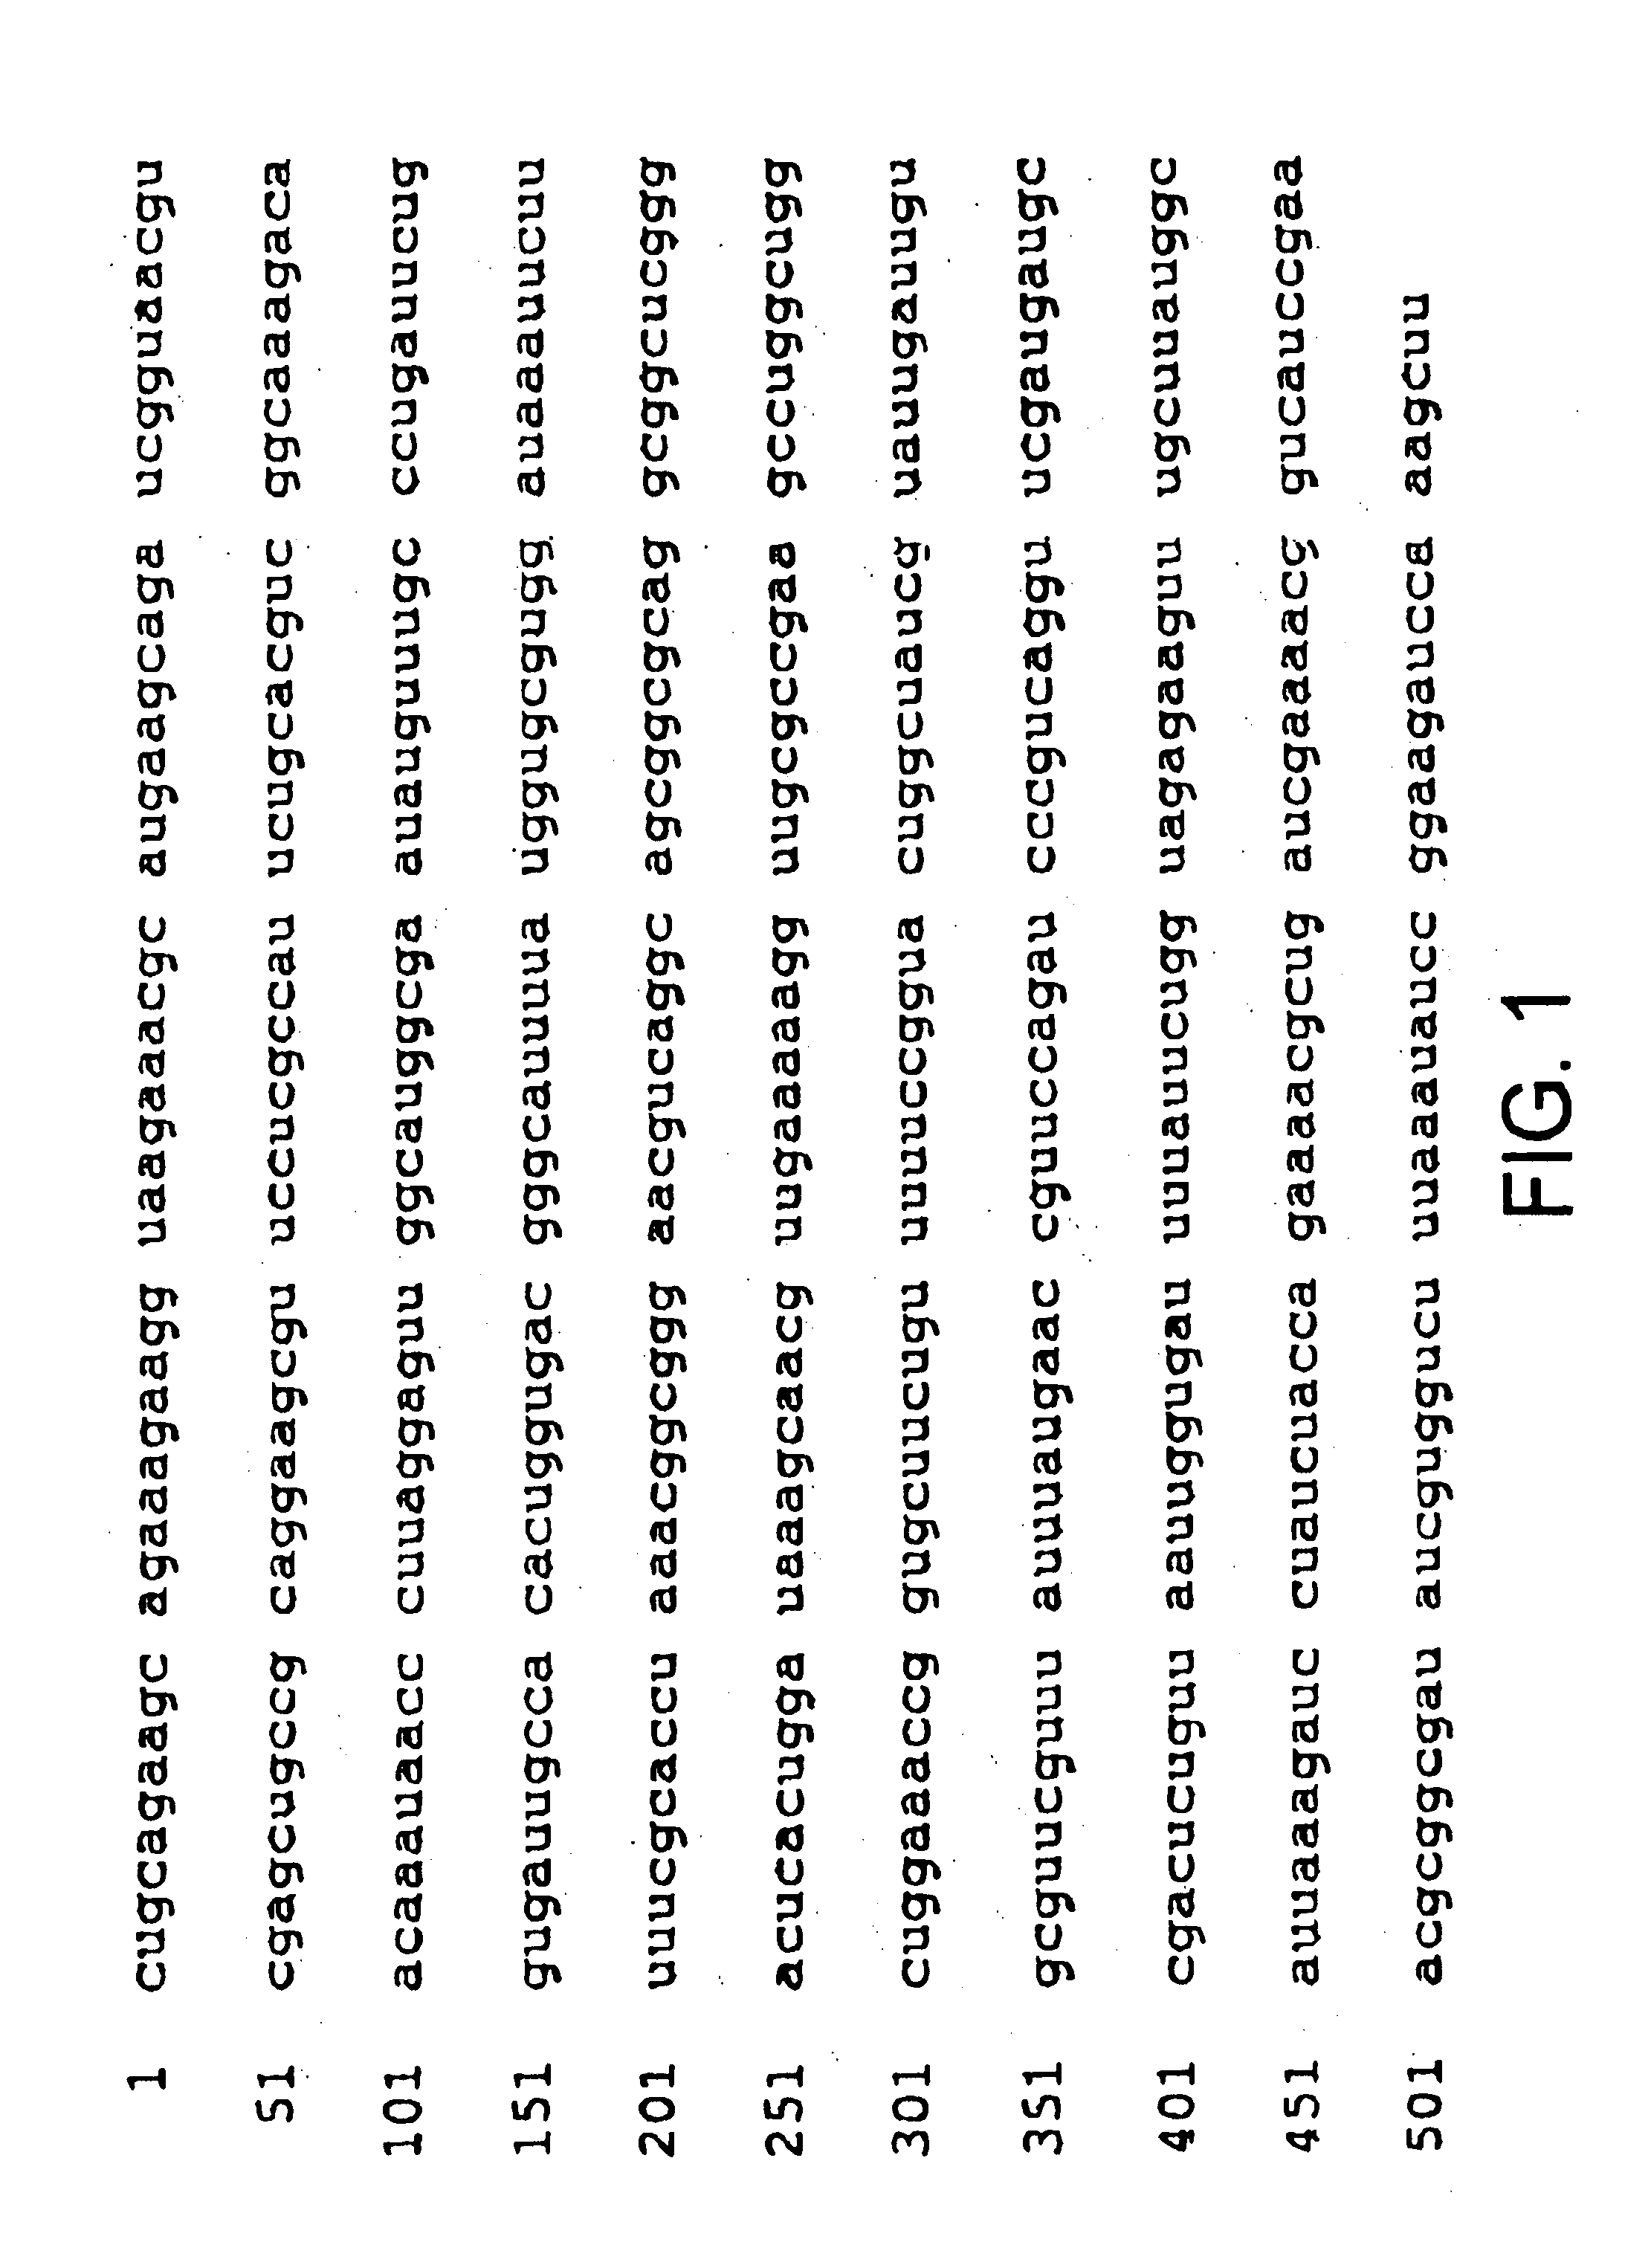 Methods for identifying anti-microbial agents